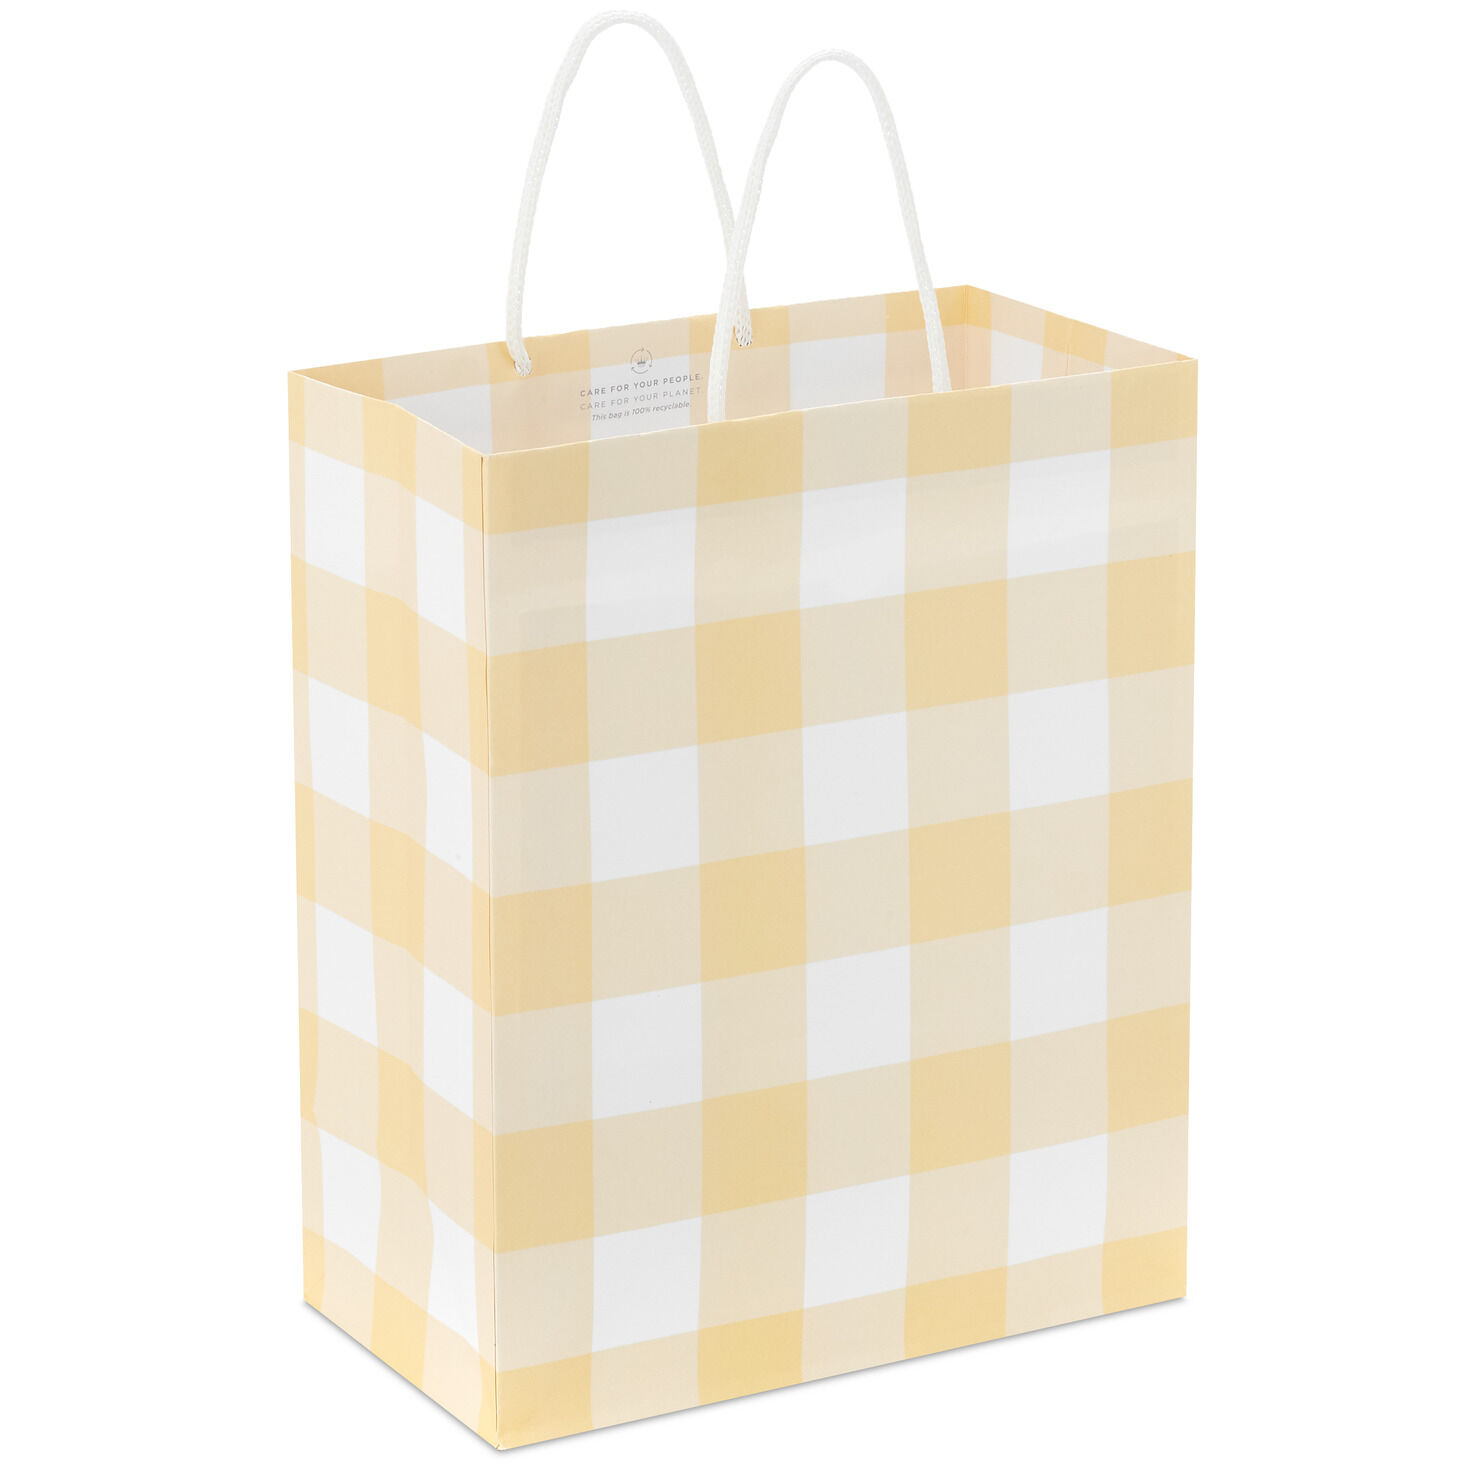 GIFTS- UK LARGE 32 X 22 CM GIFT BAGS SWEETS POLKA DOT PARTY BAGS 